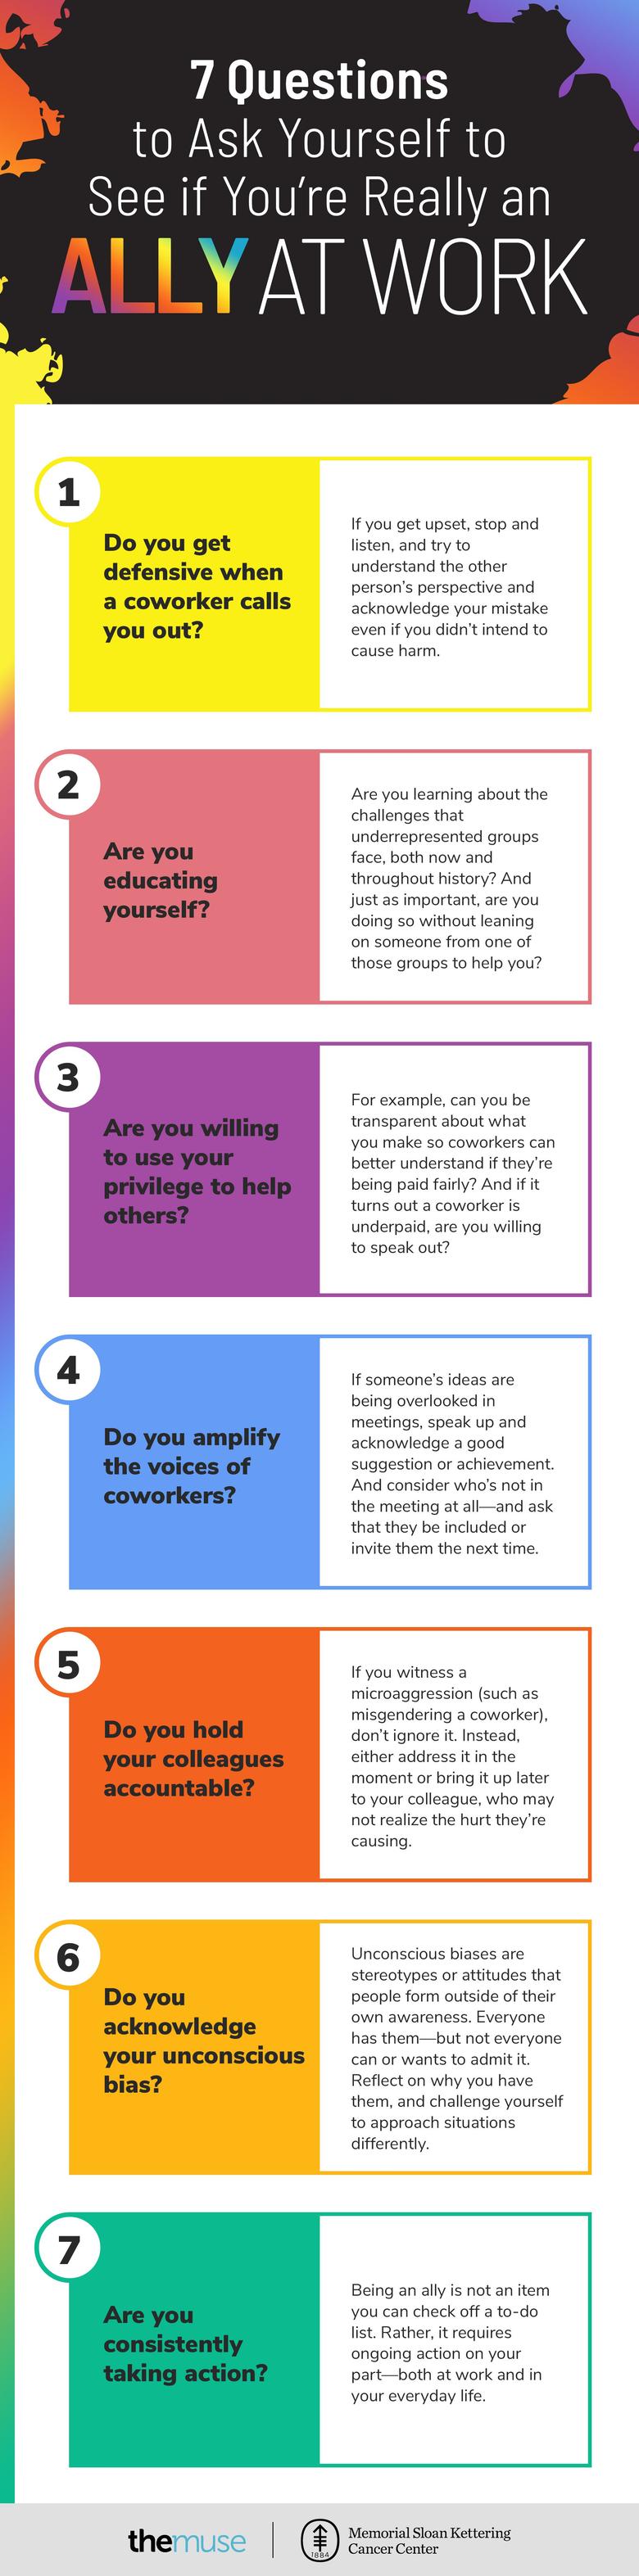 Infographic explaining the questions to ask yourself to find out if you're a good ally at work (full text in article)